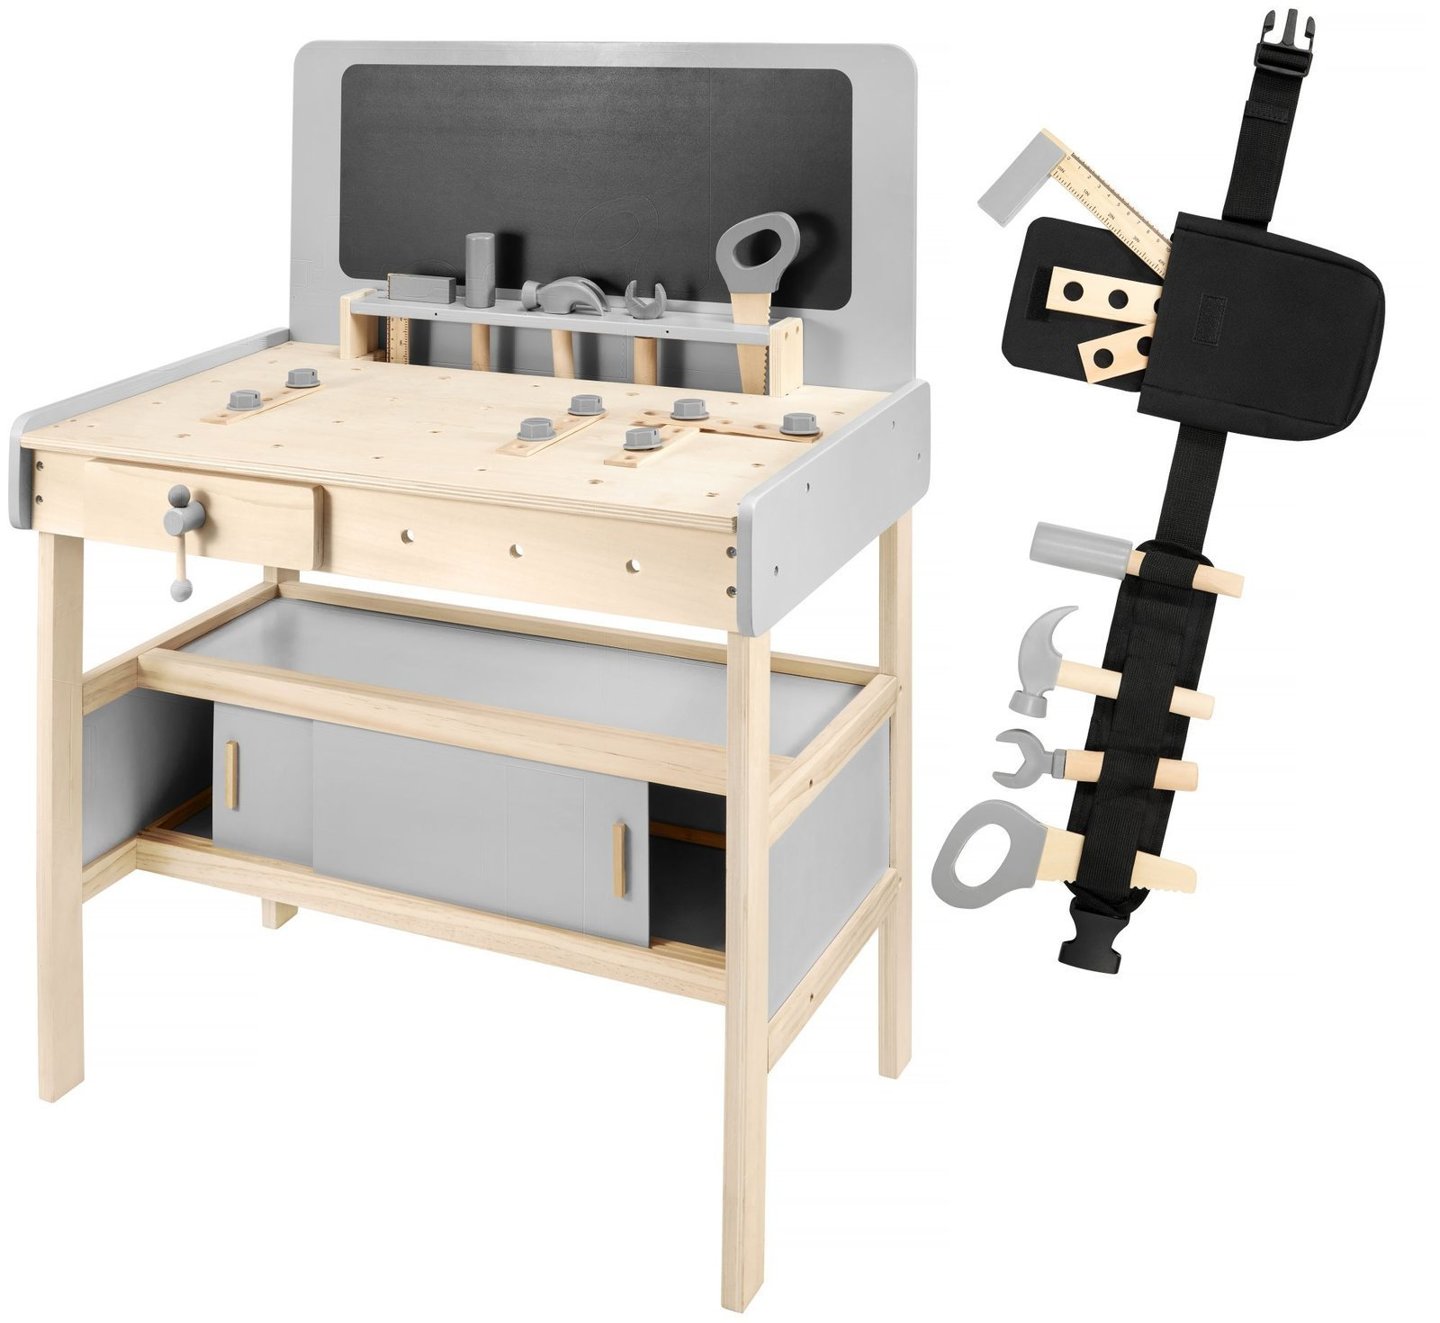 Wooden XXL workshop for children, provided with tools belt and chalk board - 48 items